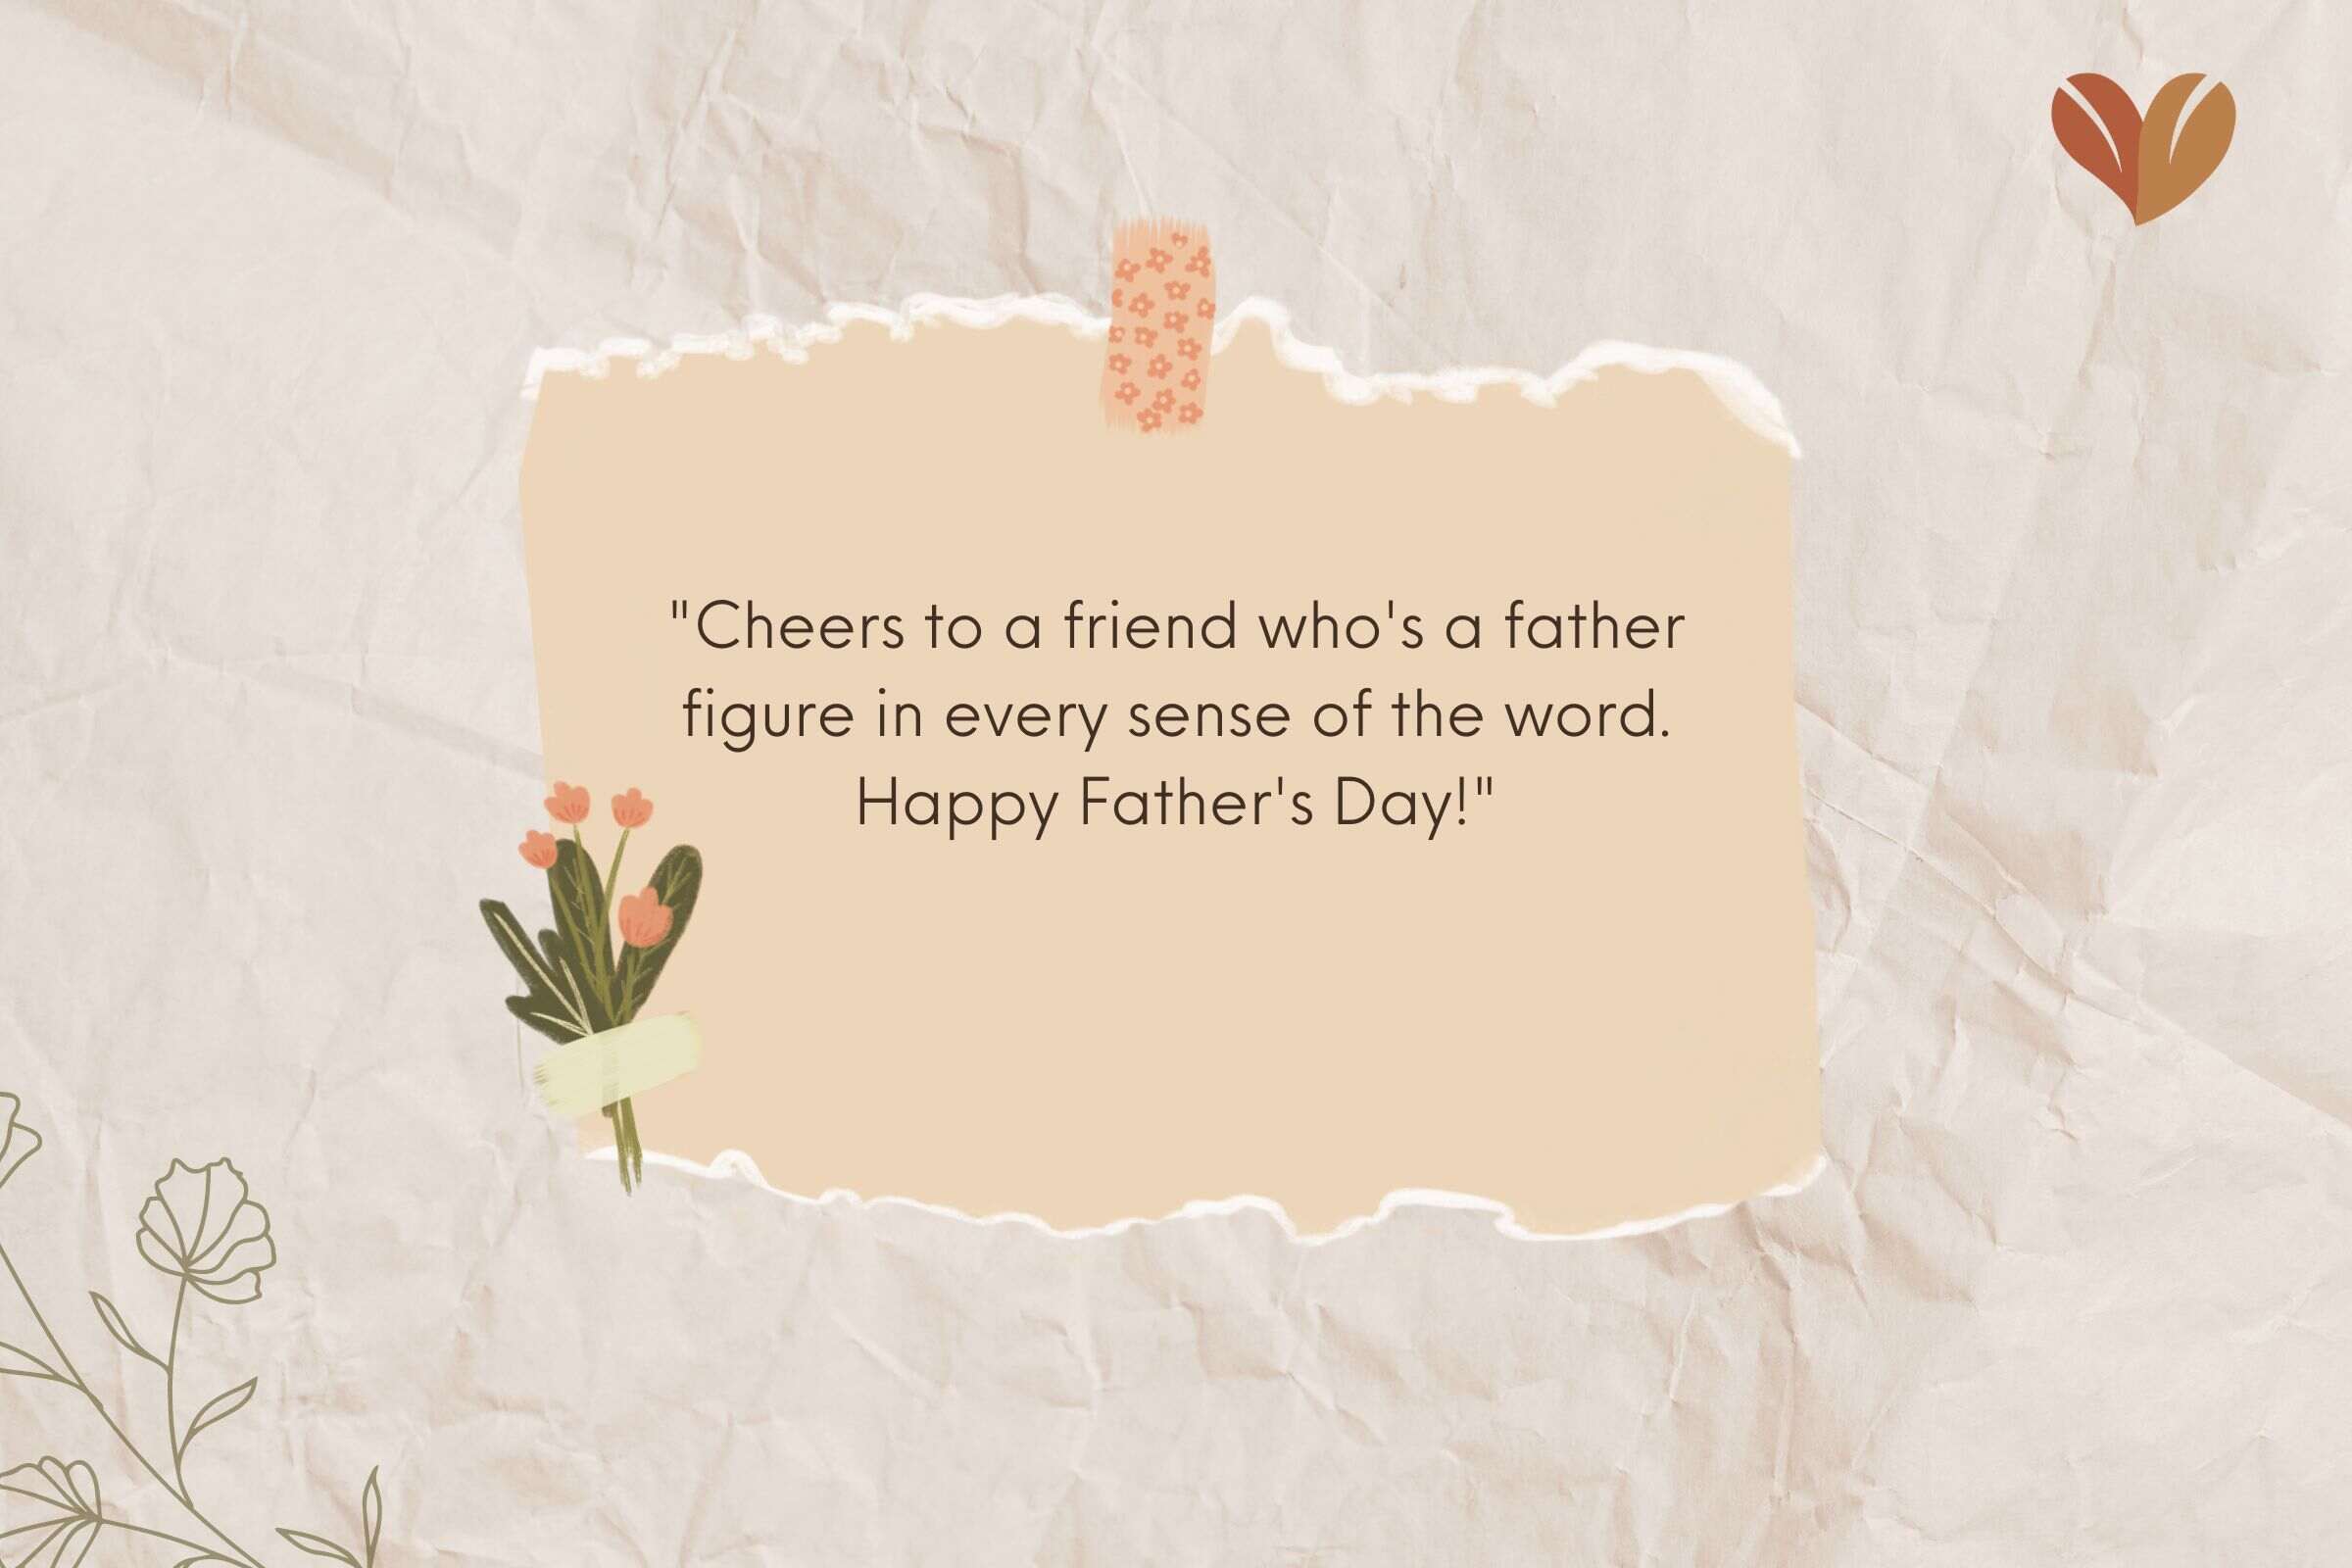 Inspirational Father's Day Wishes To A Friend